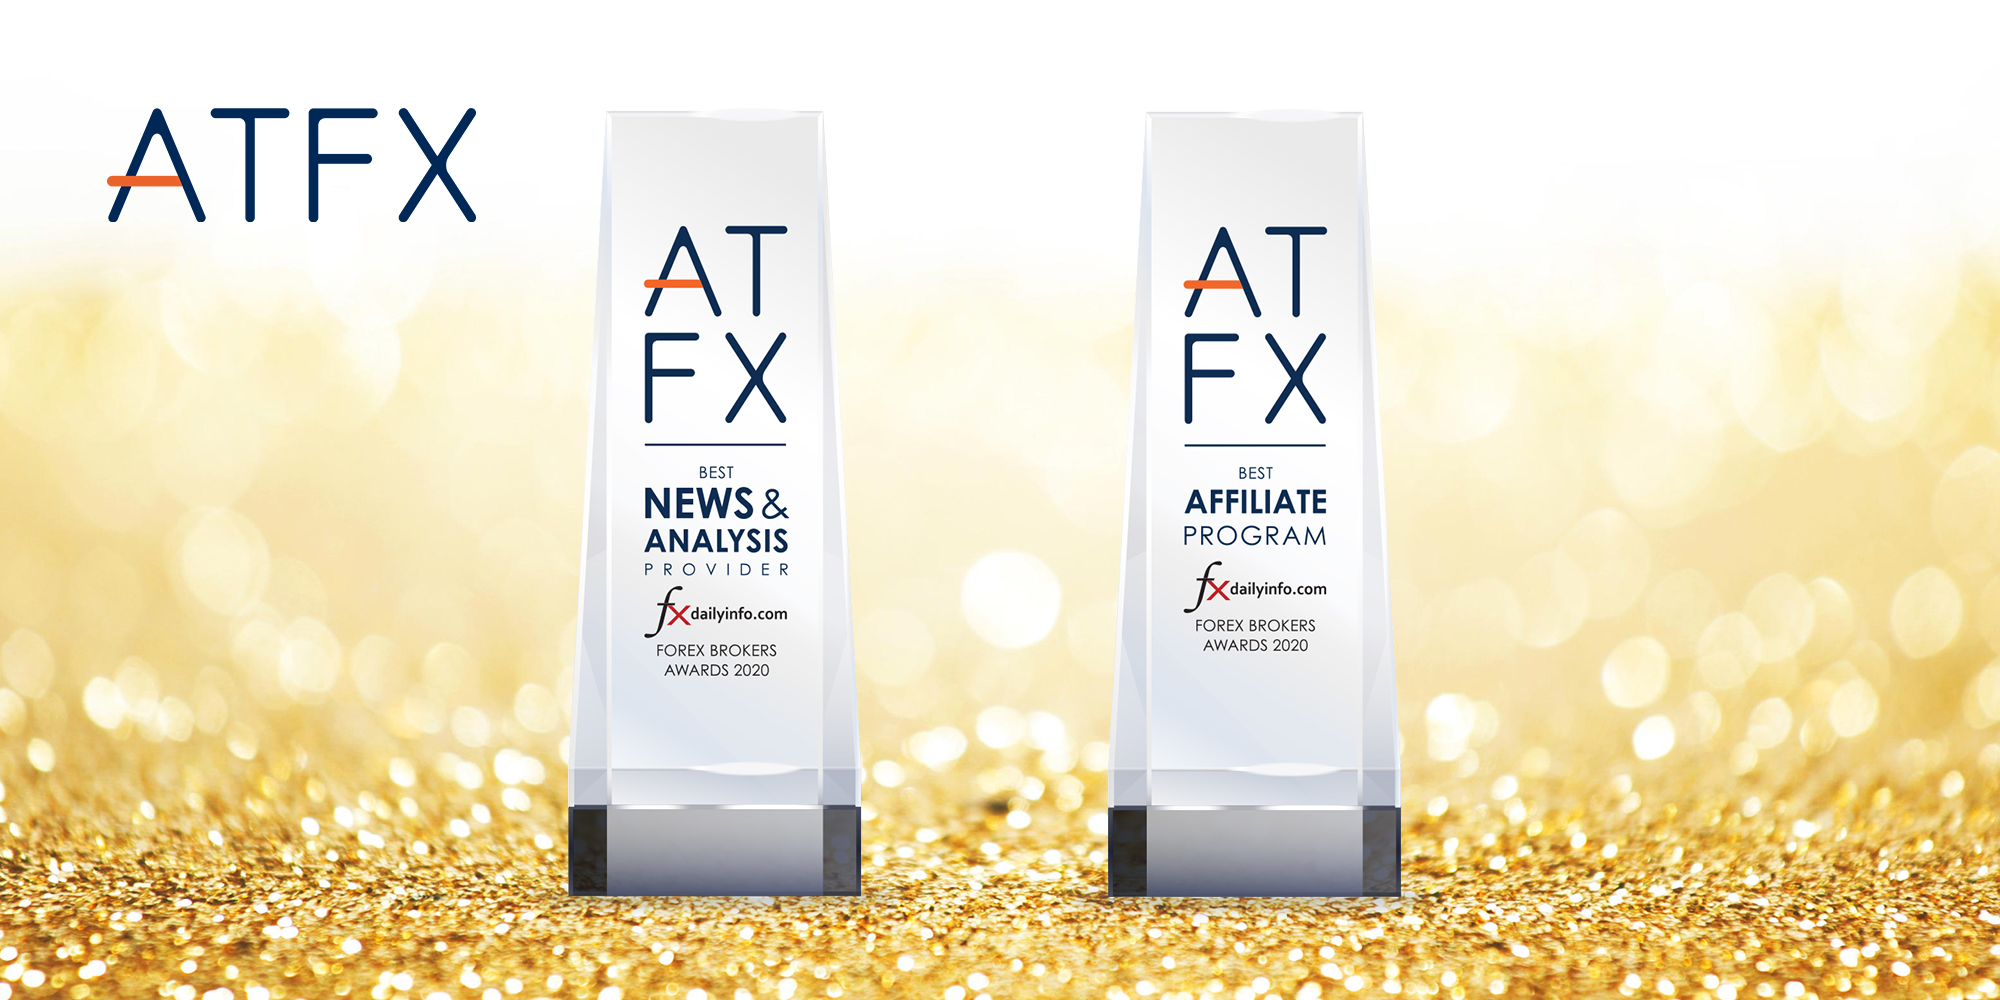 ATFX-awarded-as-Best-News-_-Analysis-Provider-in-2020_1_